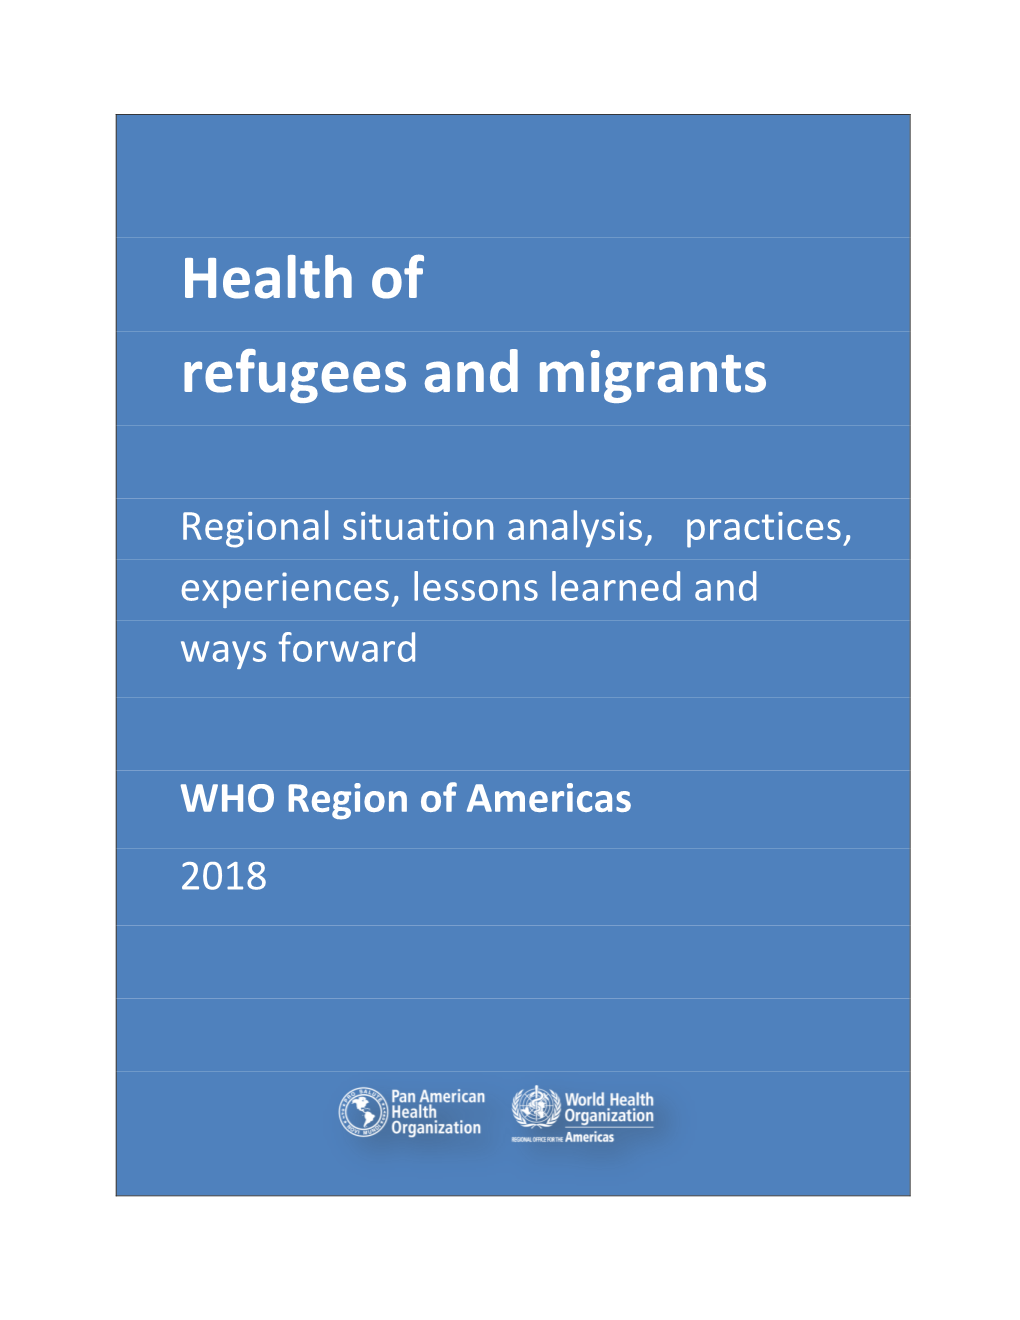 Health of Refugees and Migrants